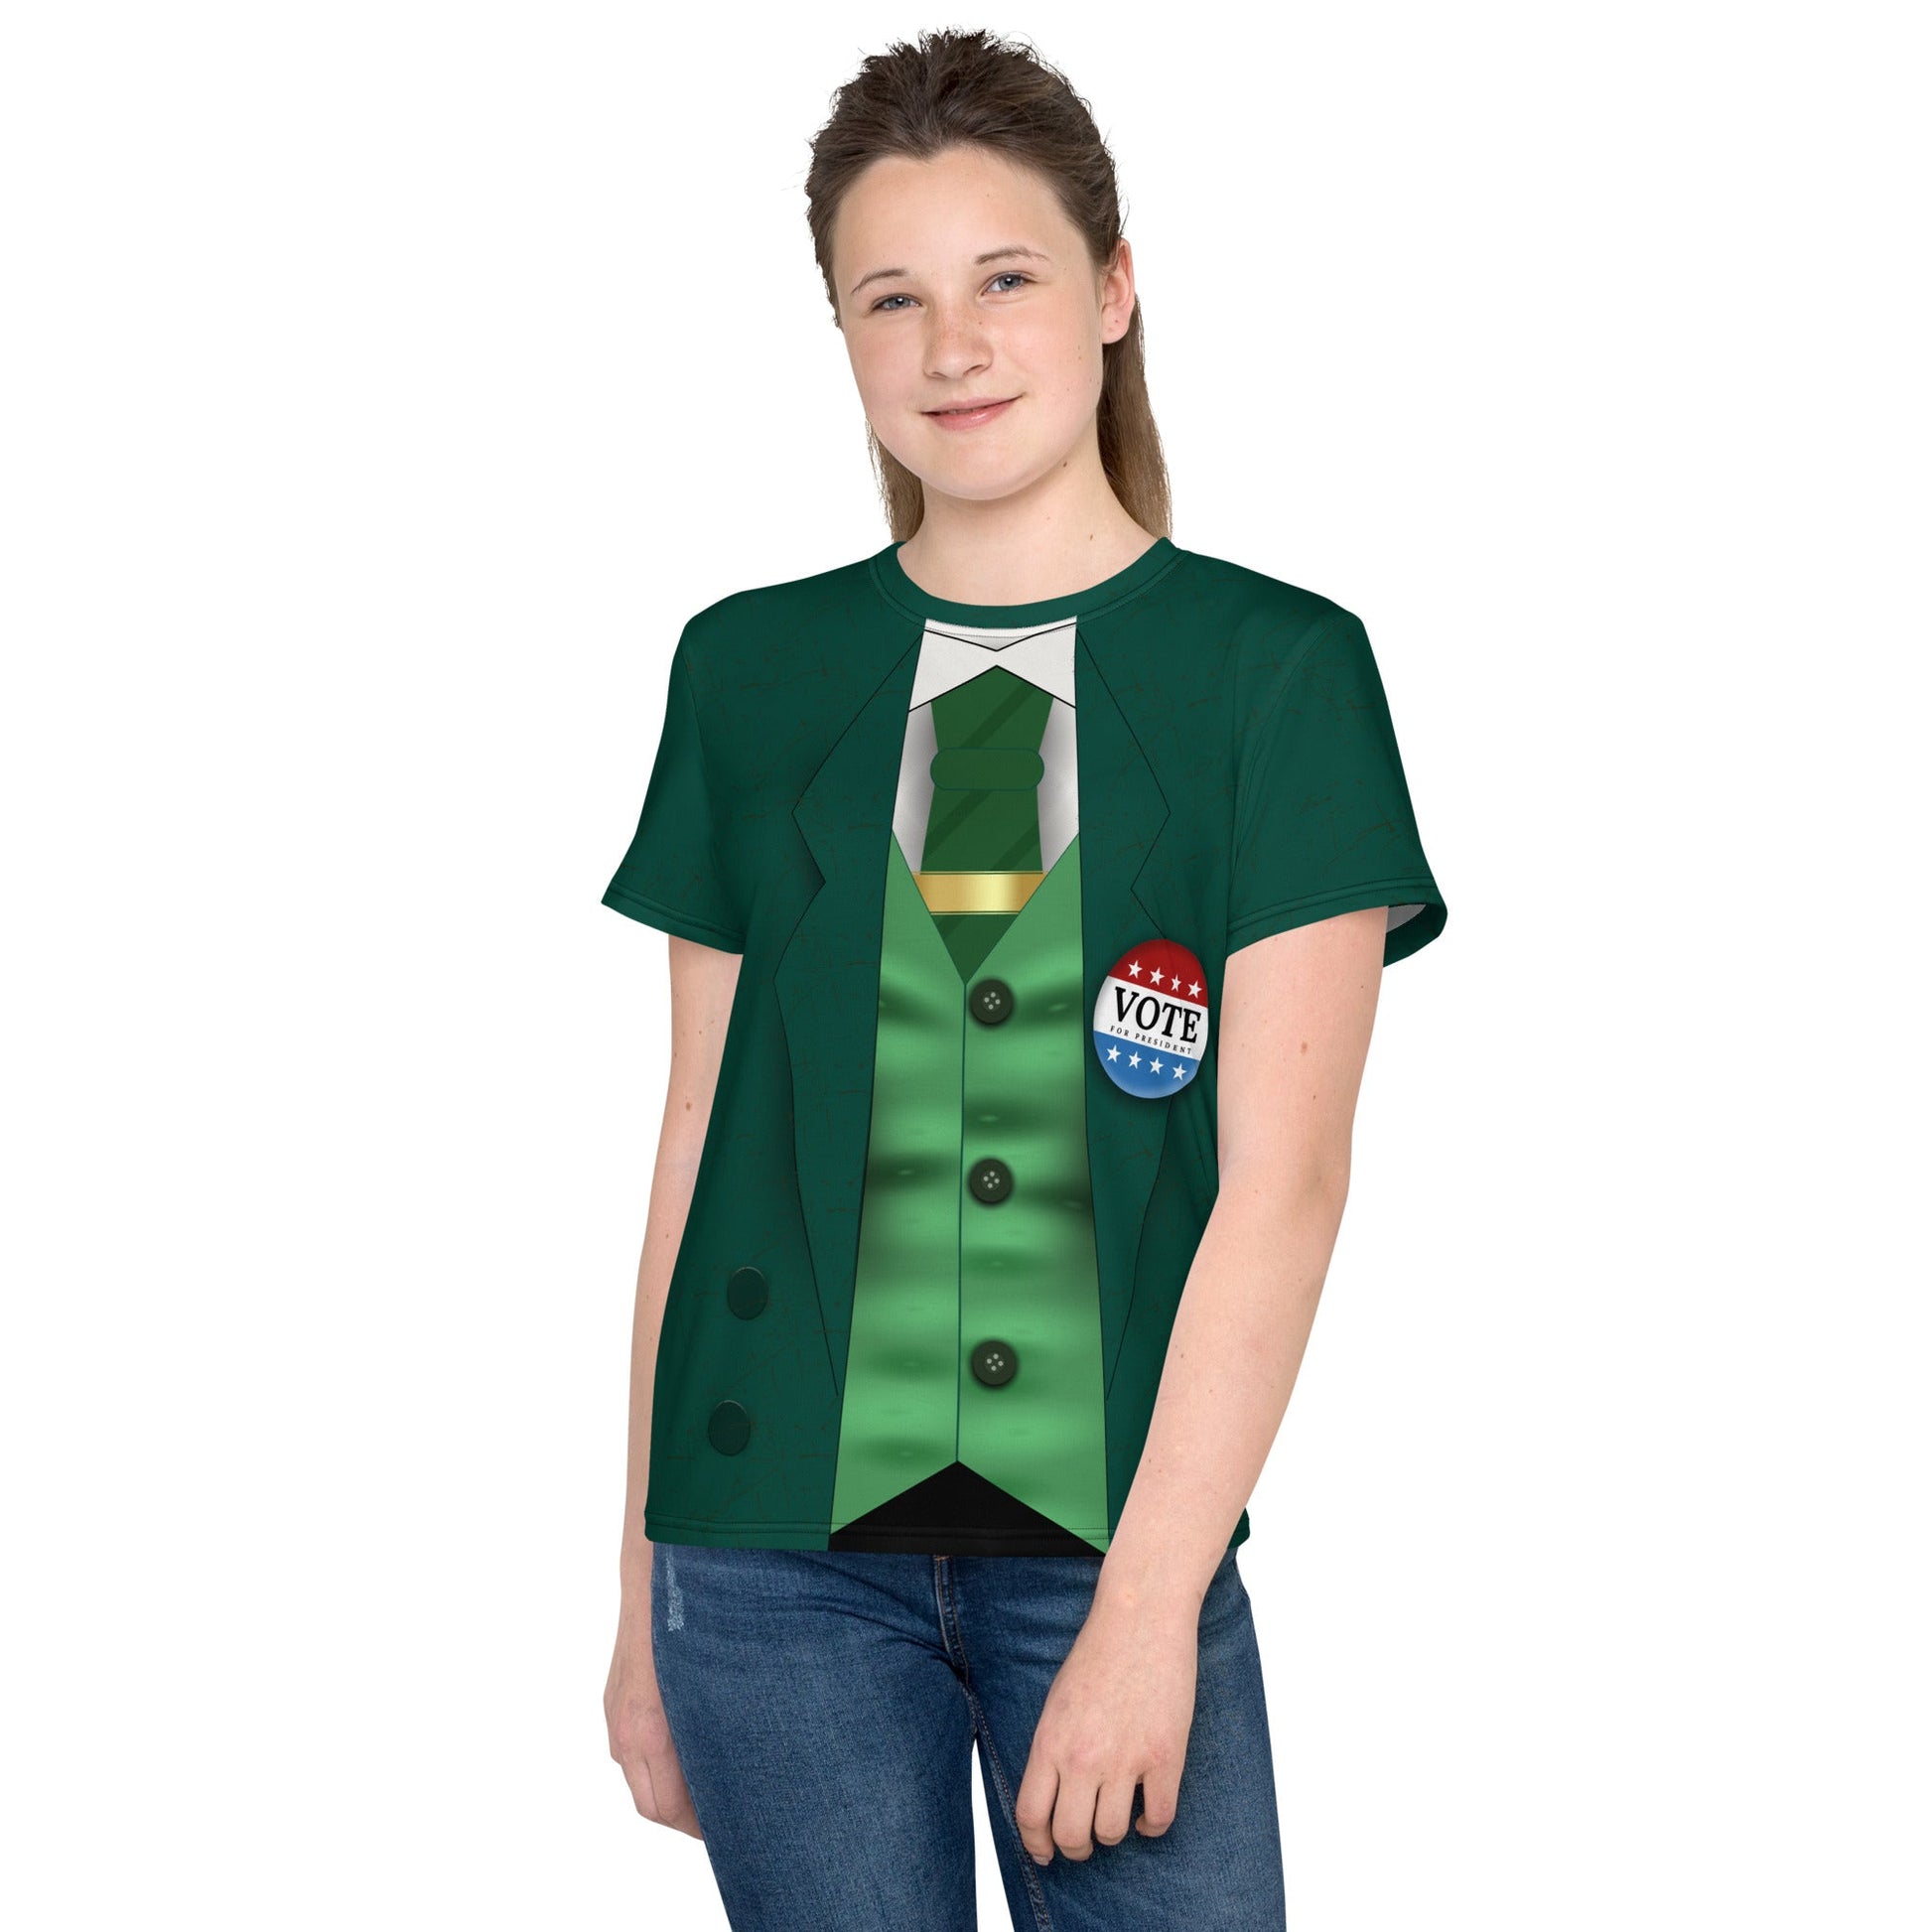 Loki for President Youth crew neck t-shirt avengers universecharacter cosplaycosplay#tag4##tag5##tag6#